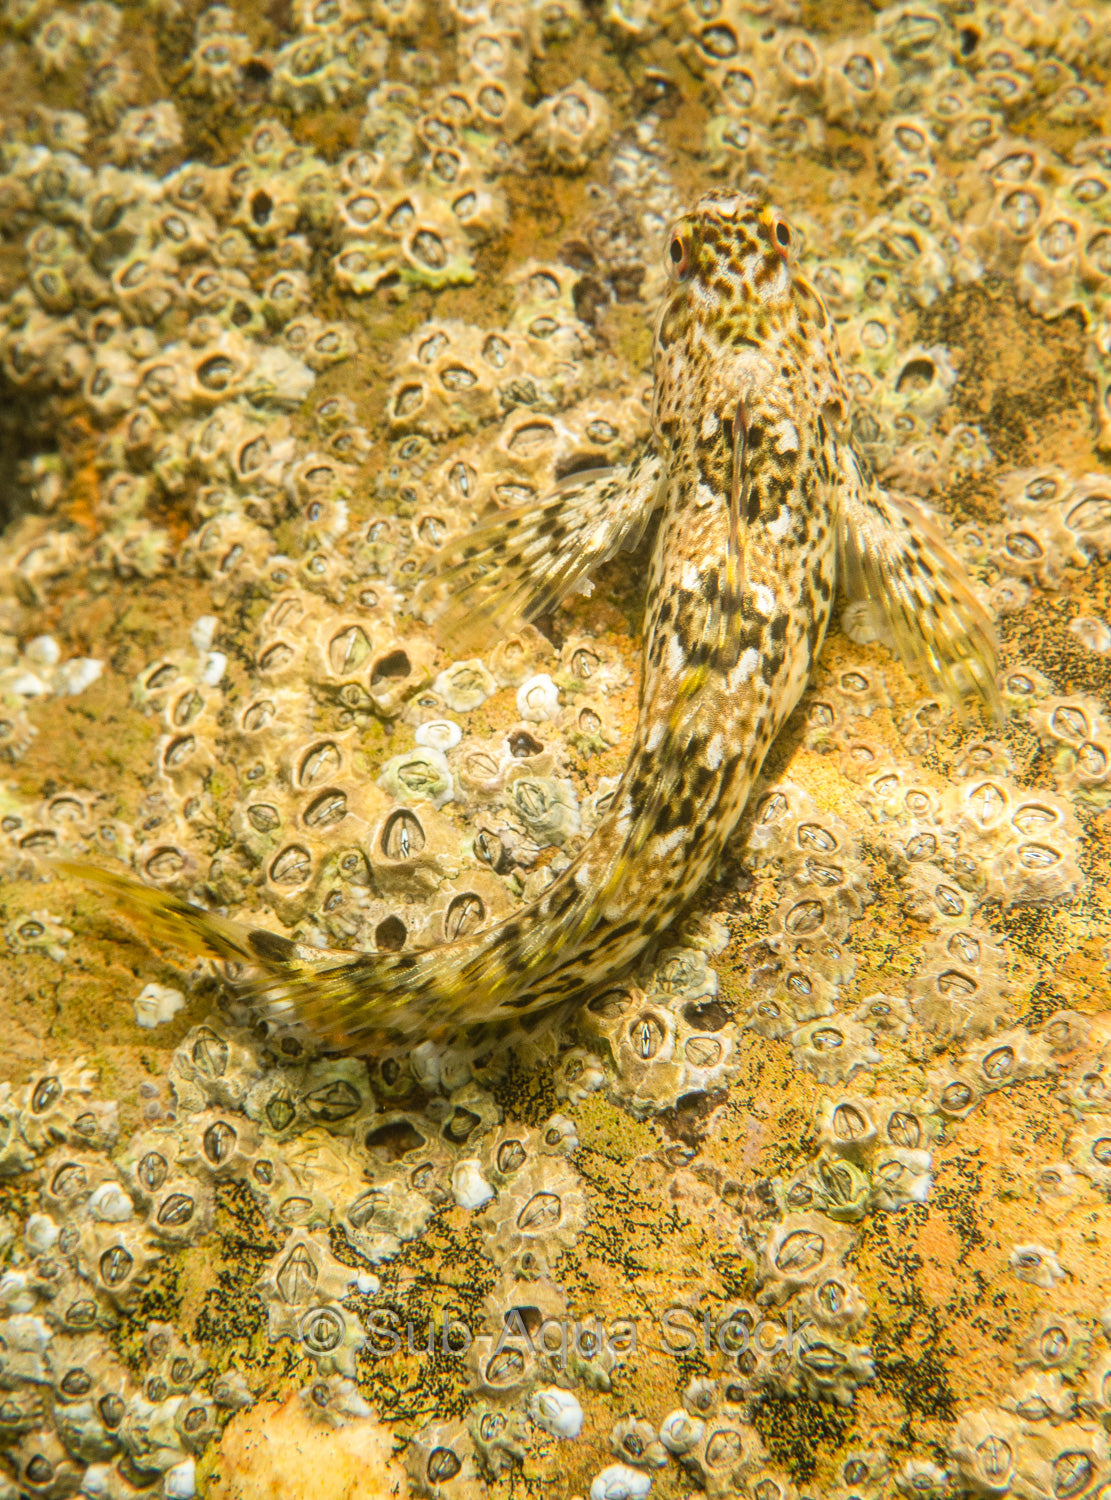 Blenny (Lipophrys pholis) blending in with a barnacle background.